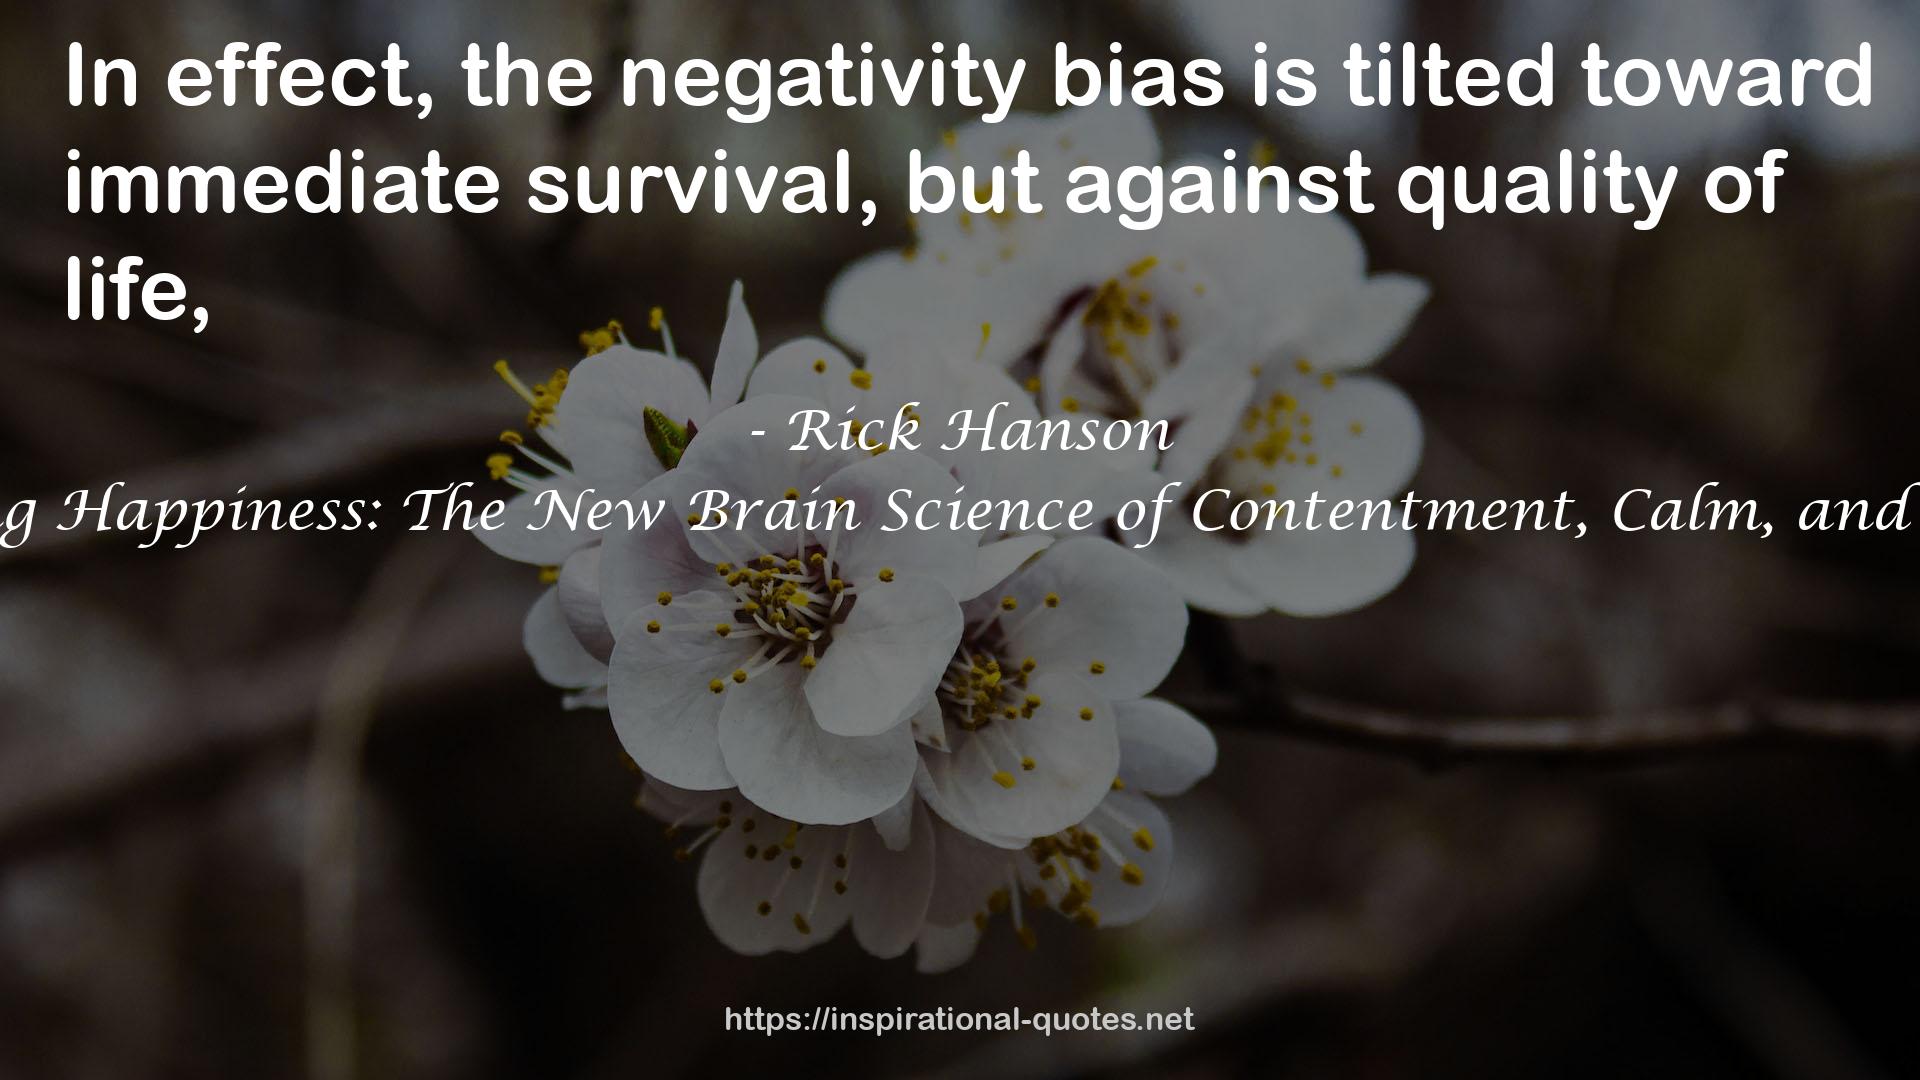 Hardwiring Happiness: The New Brain Science of Contentment, Calm, and Confidence QUOTES